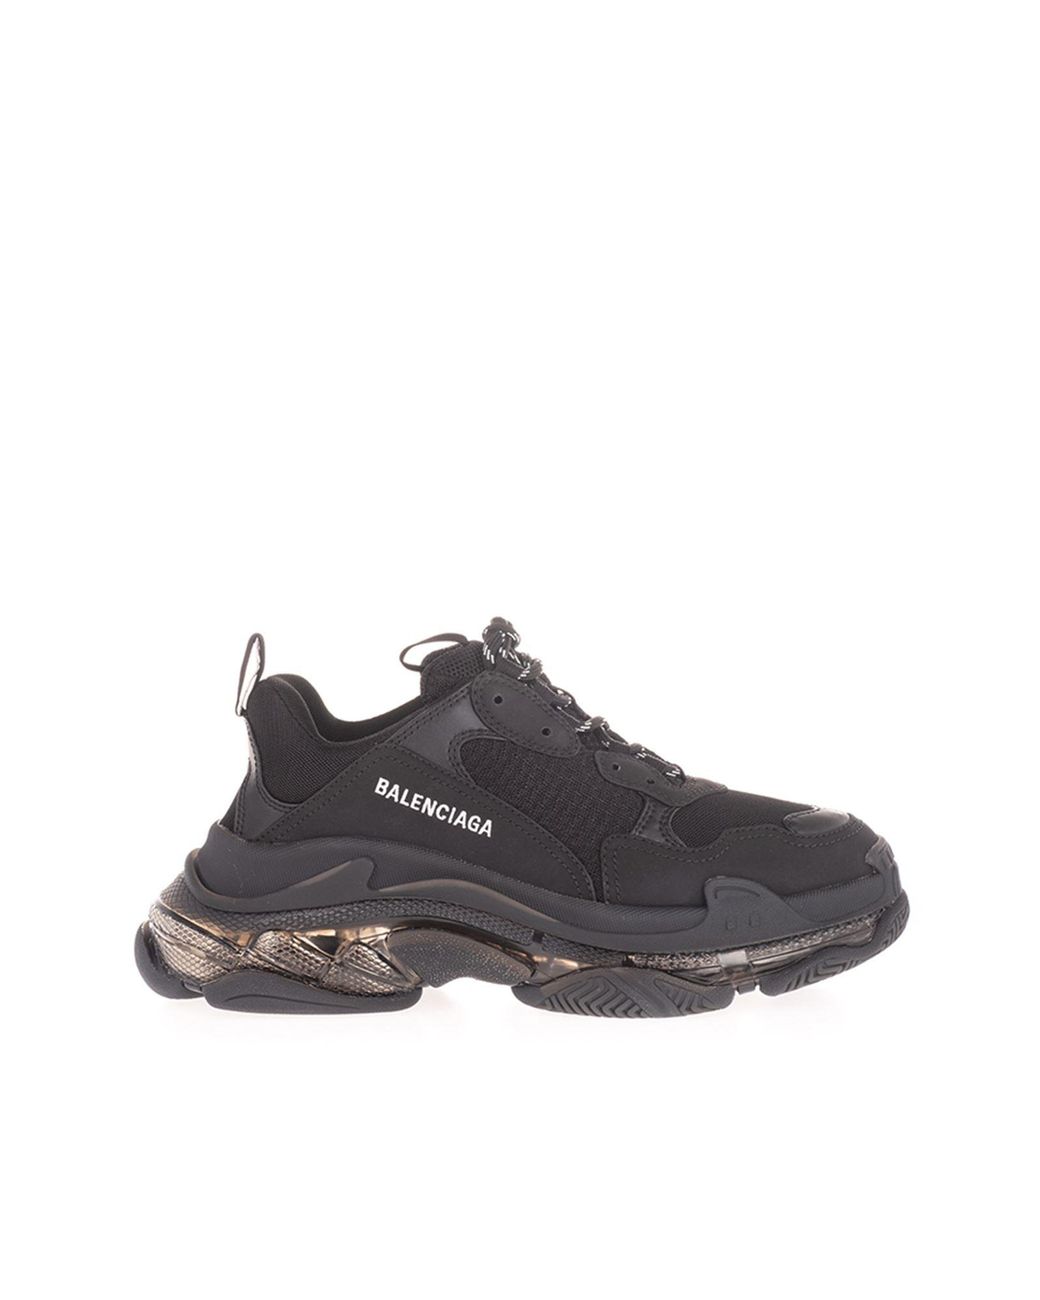 Balenciaga Leather Triple S Sneakers in Black for Men - Lyst